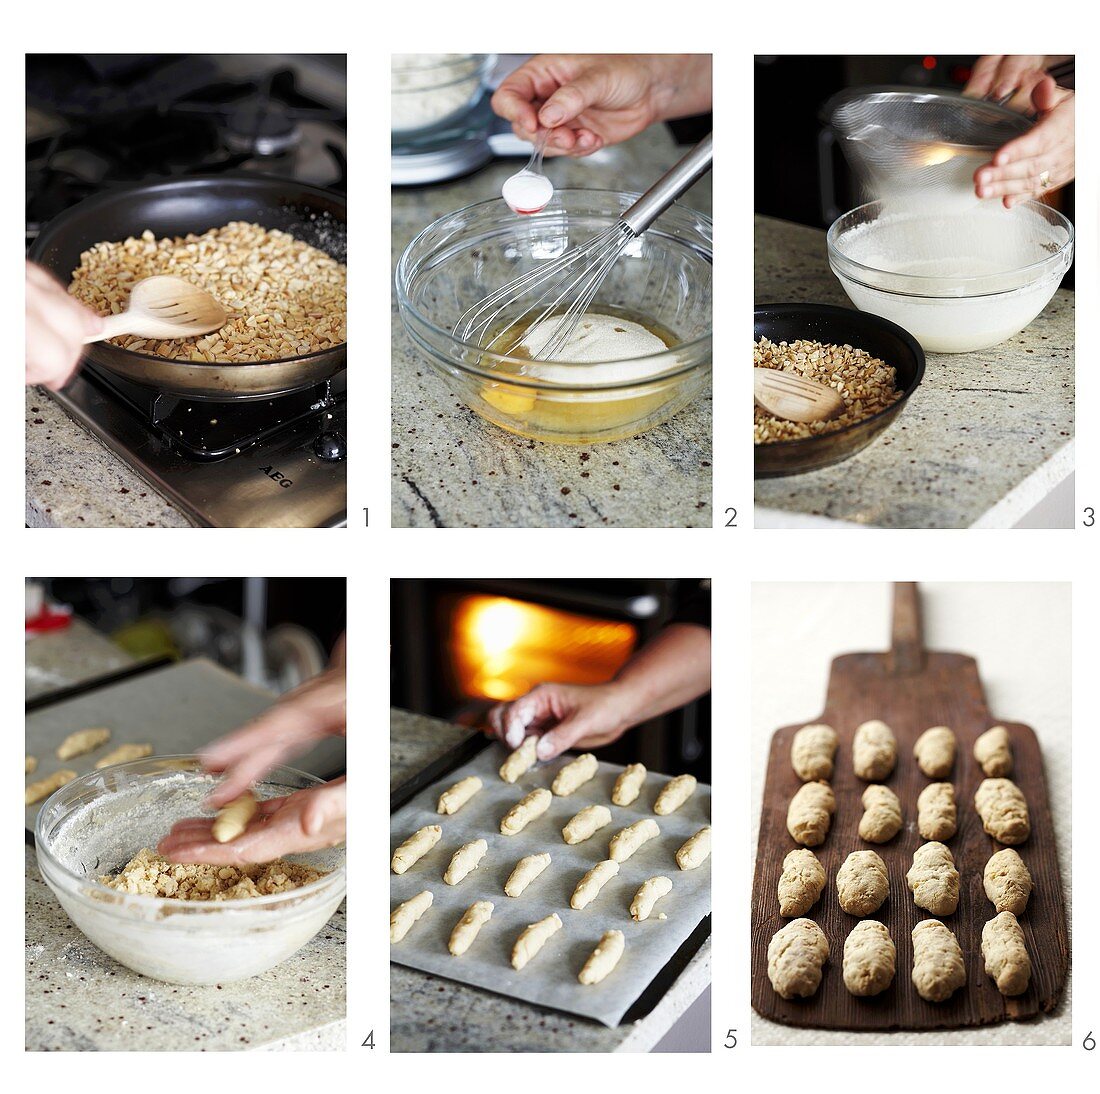 Making almond biscuits